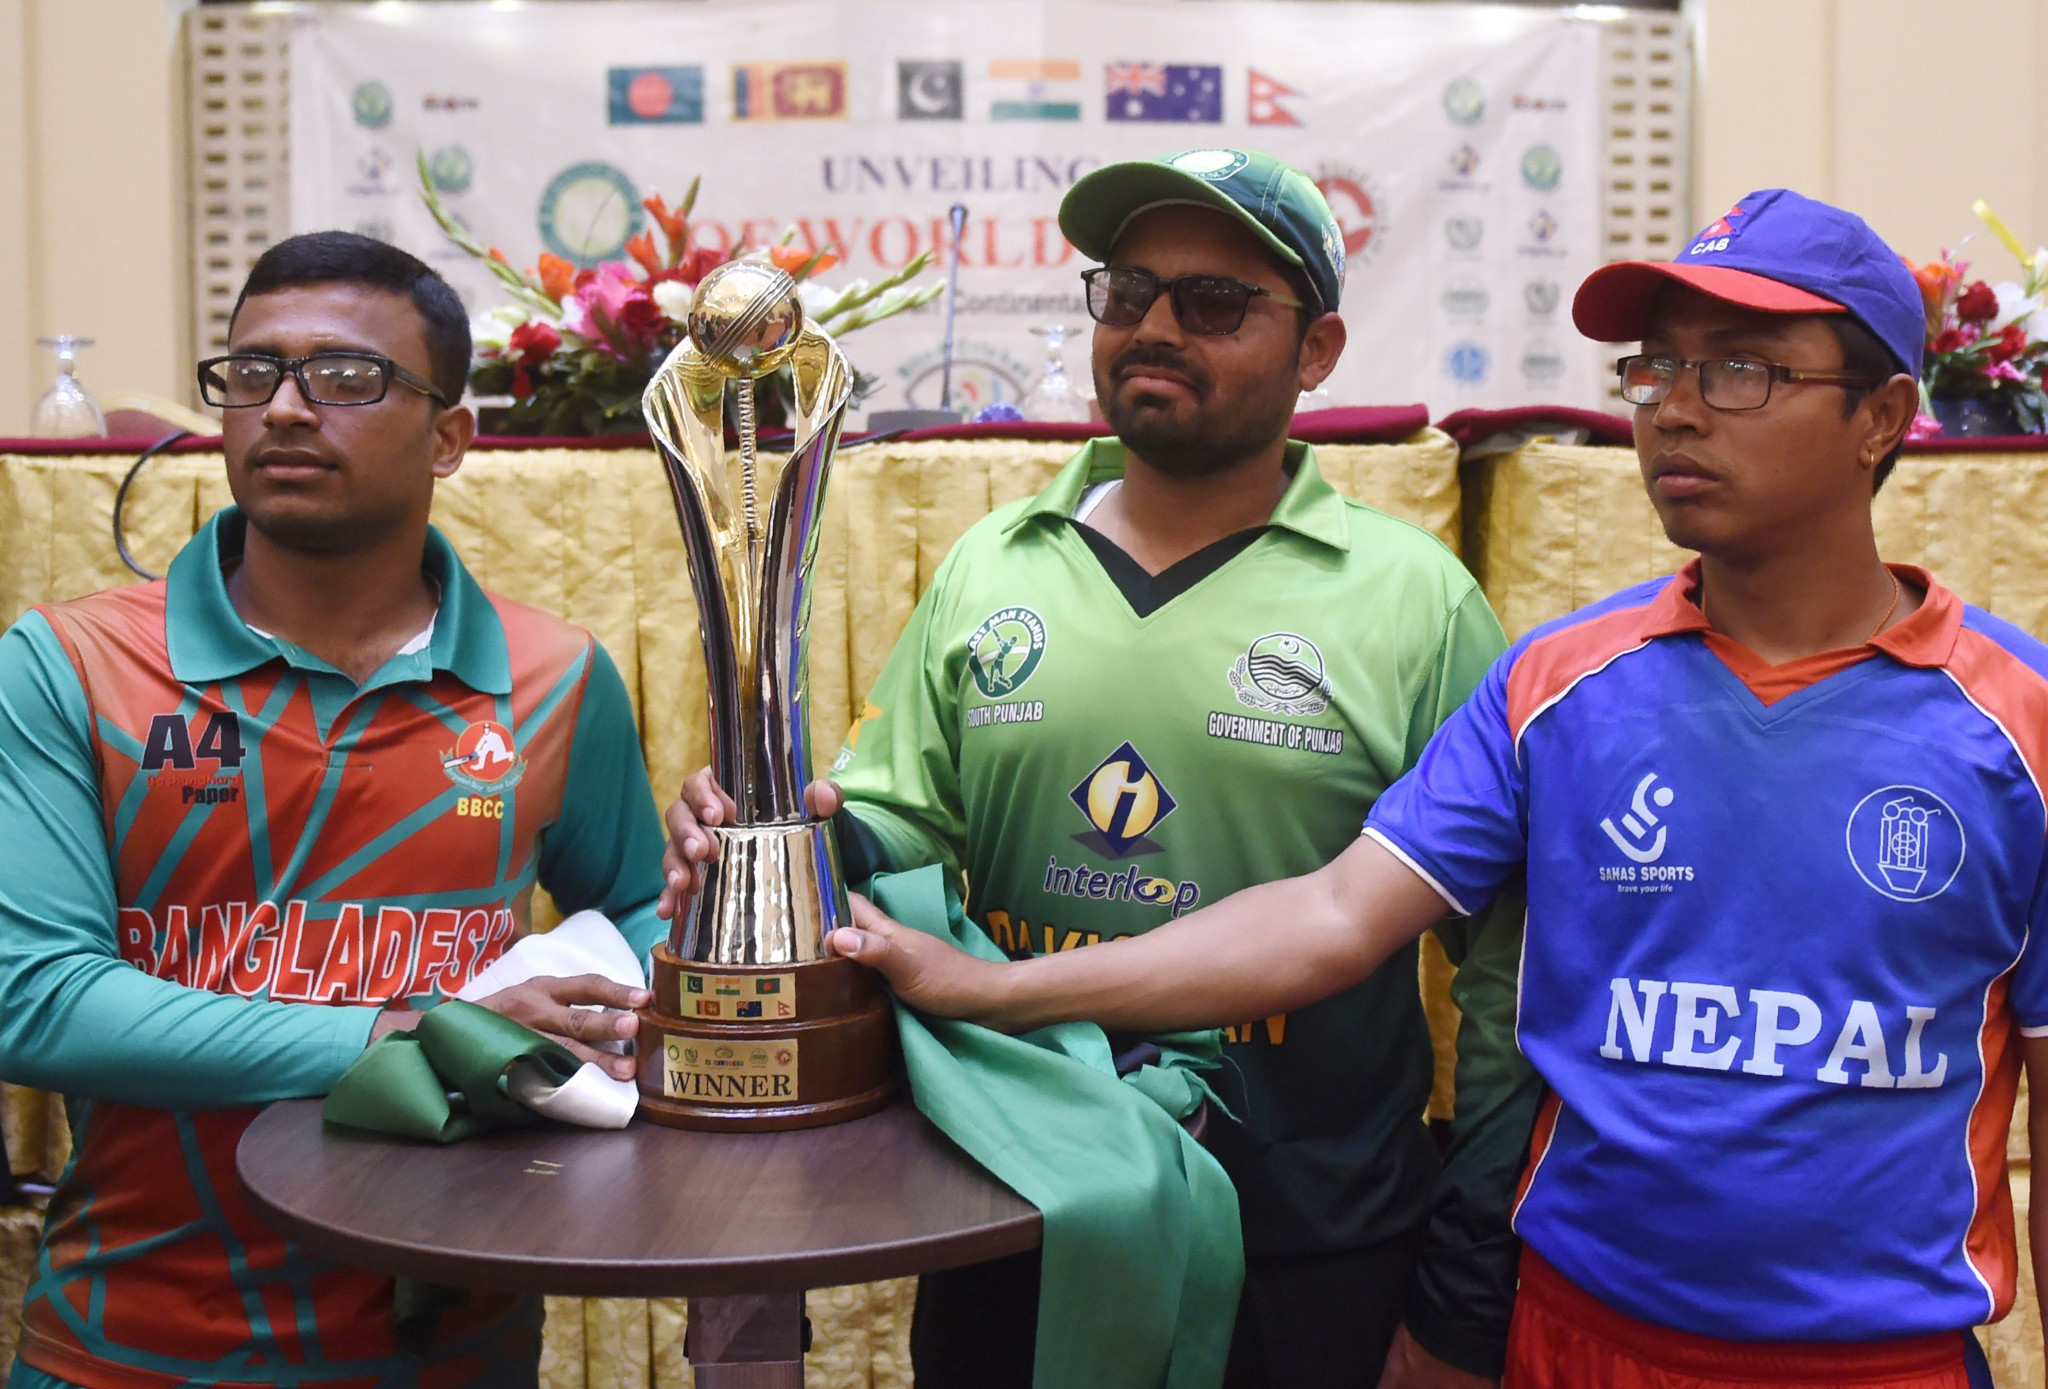 Schedule changed for 2018 Blind Cricket World Cup with India denied permission to travel to Pakistan